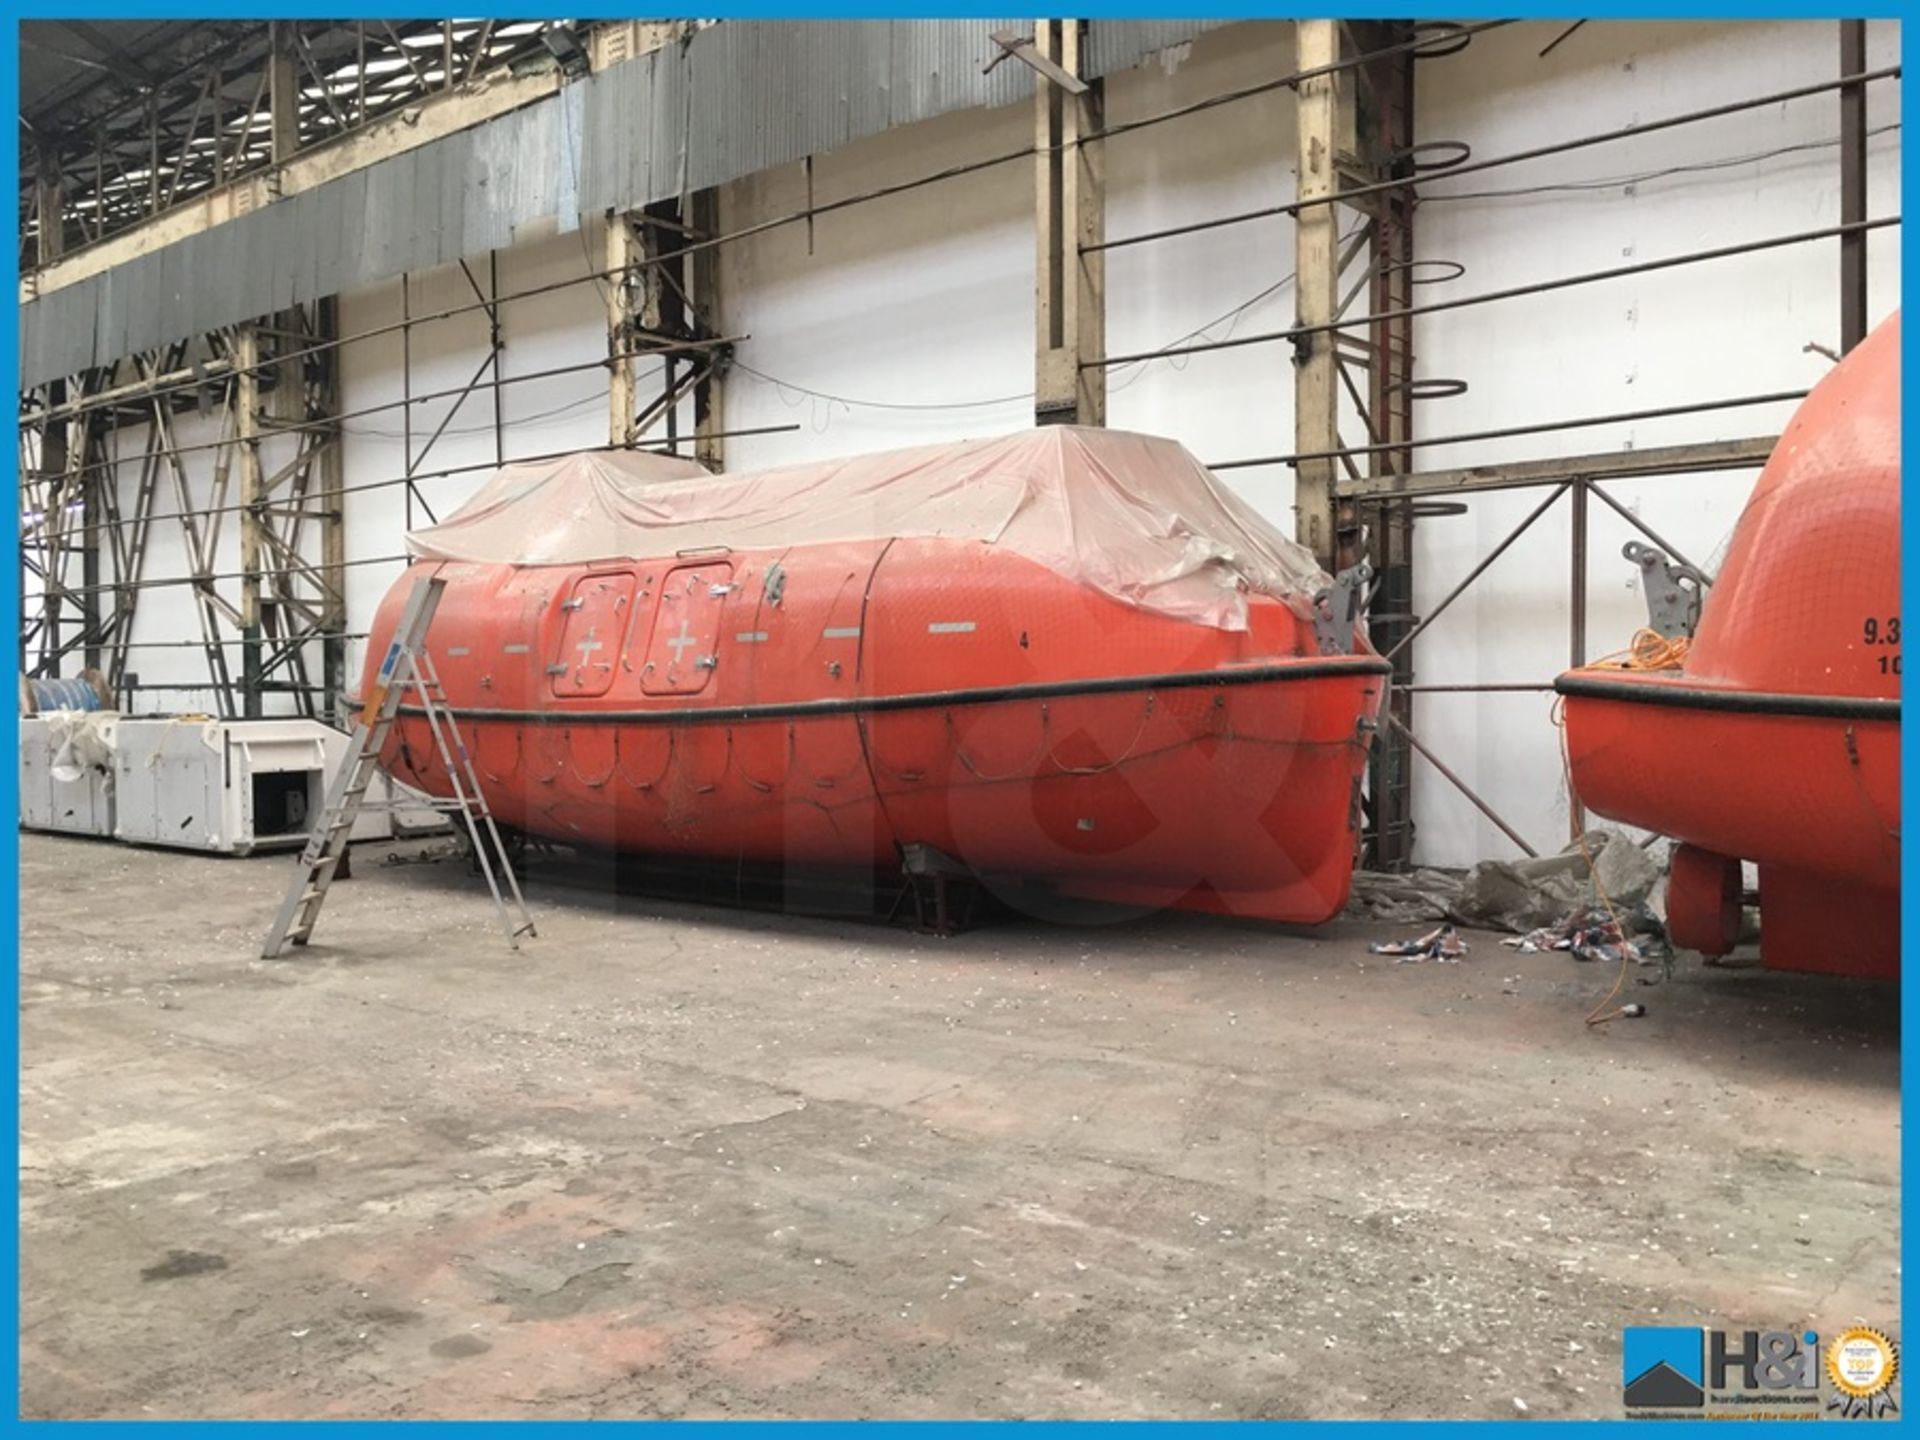 Noreq LBT935T totally enclosed lifeboat built approximately 2010 for same marine project as the - Image 33 of 38